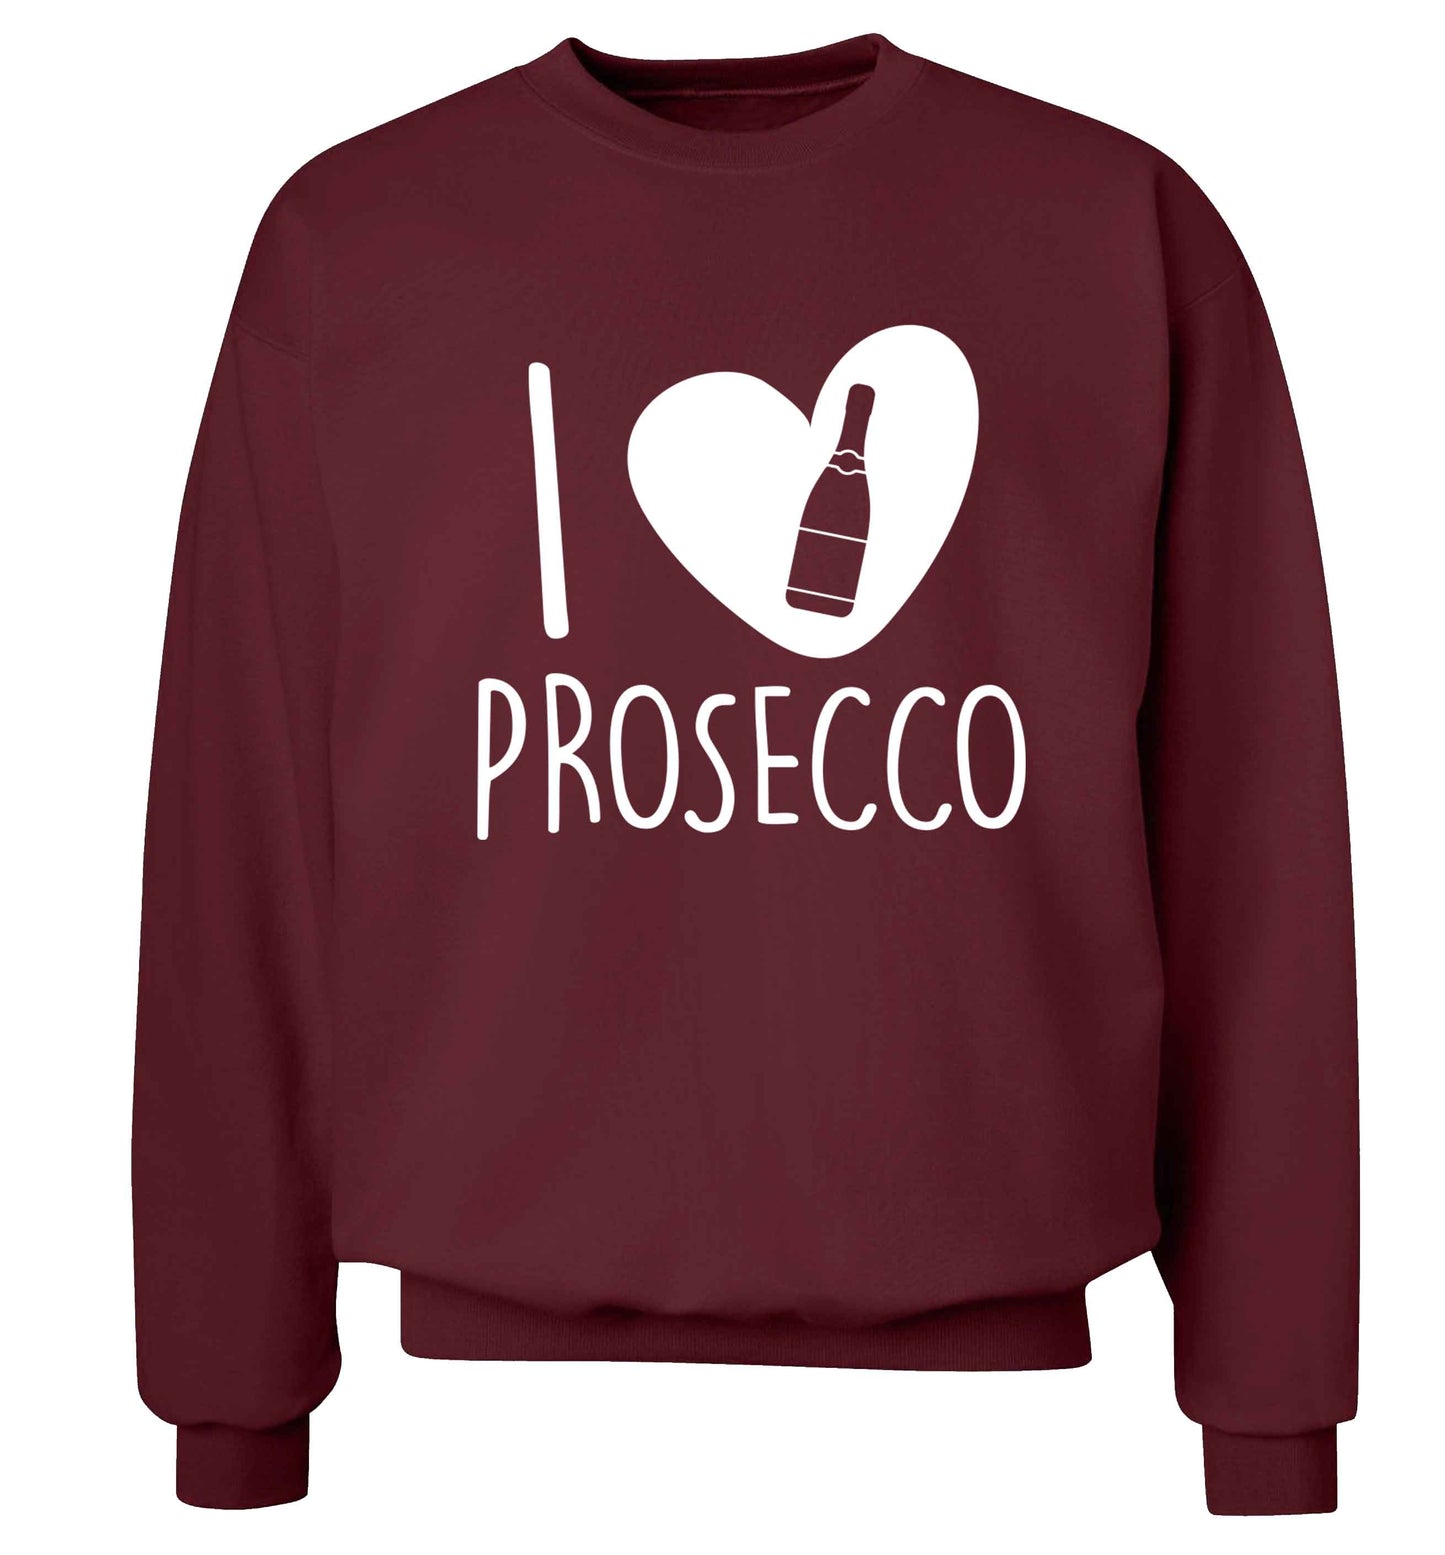 I love prosecco Adult's unisex maroon Sweater 2XL